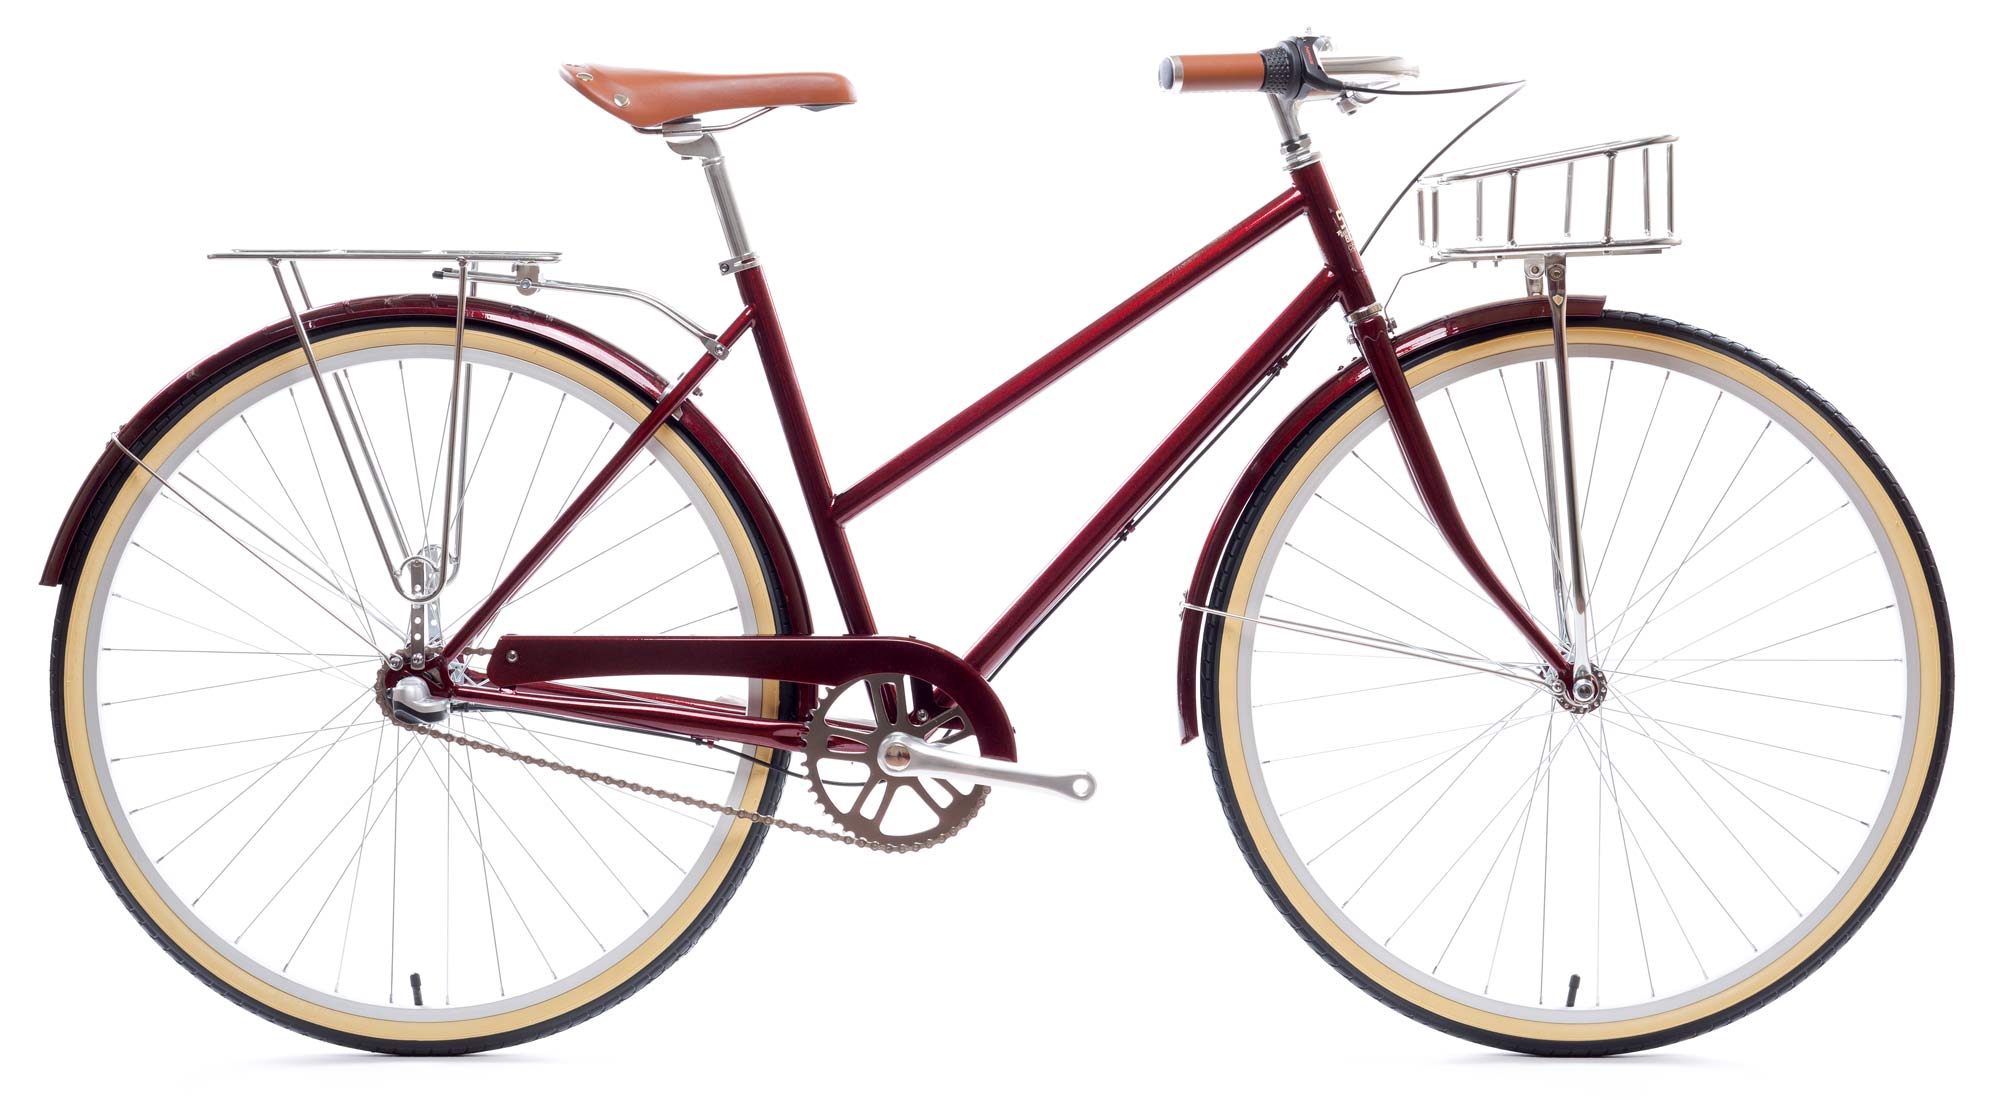 State Bicycles affordable steel campus commuter city bike